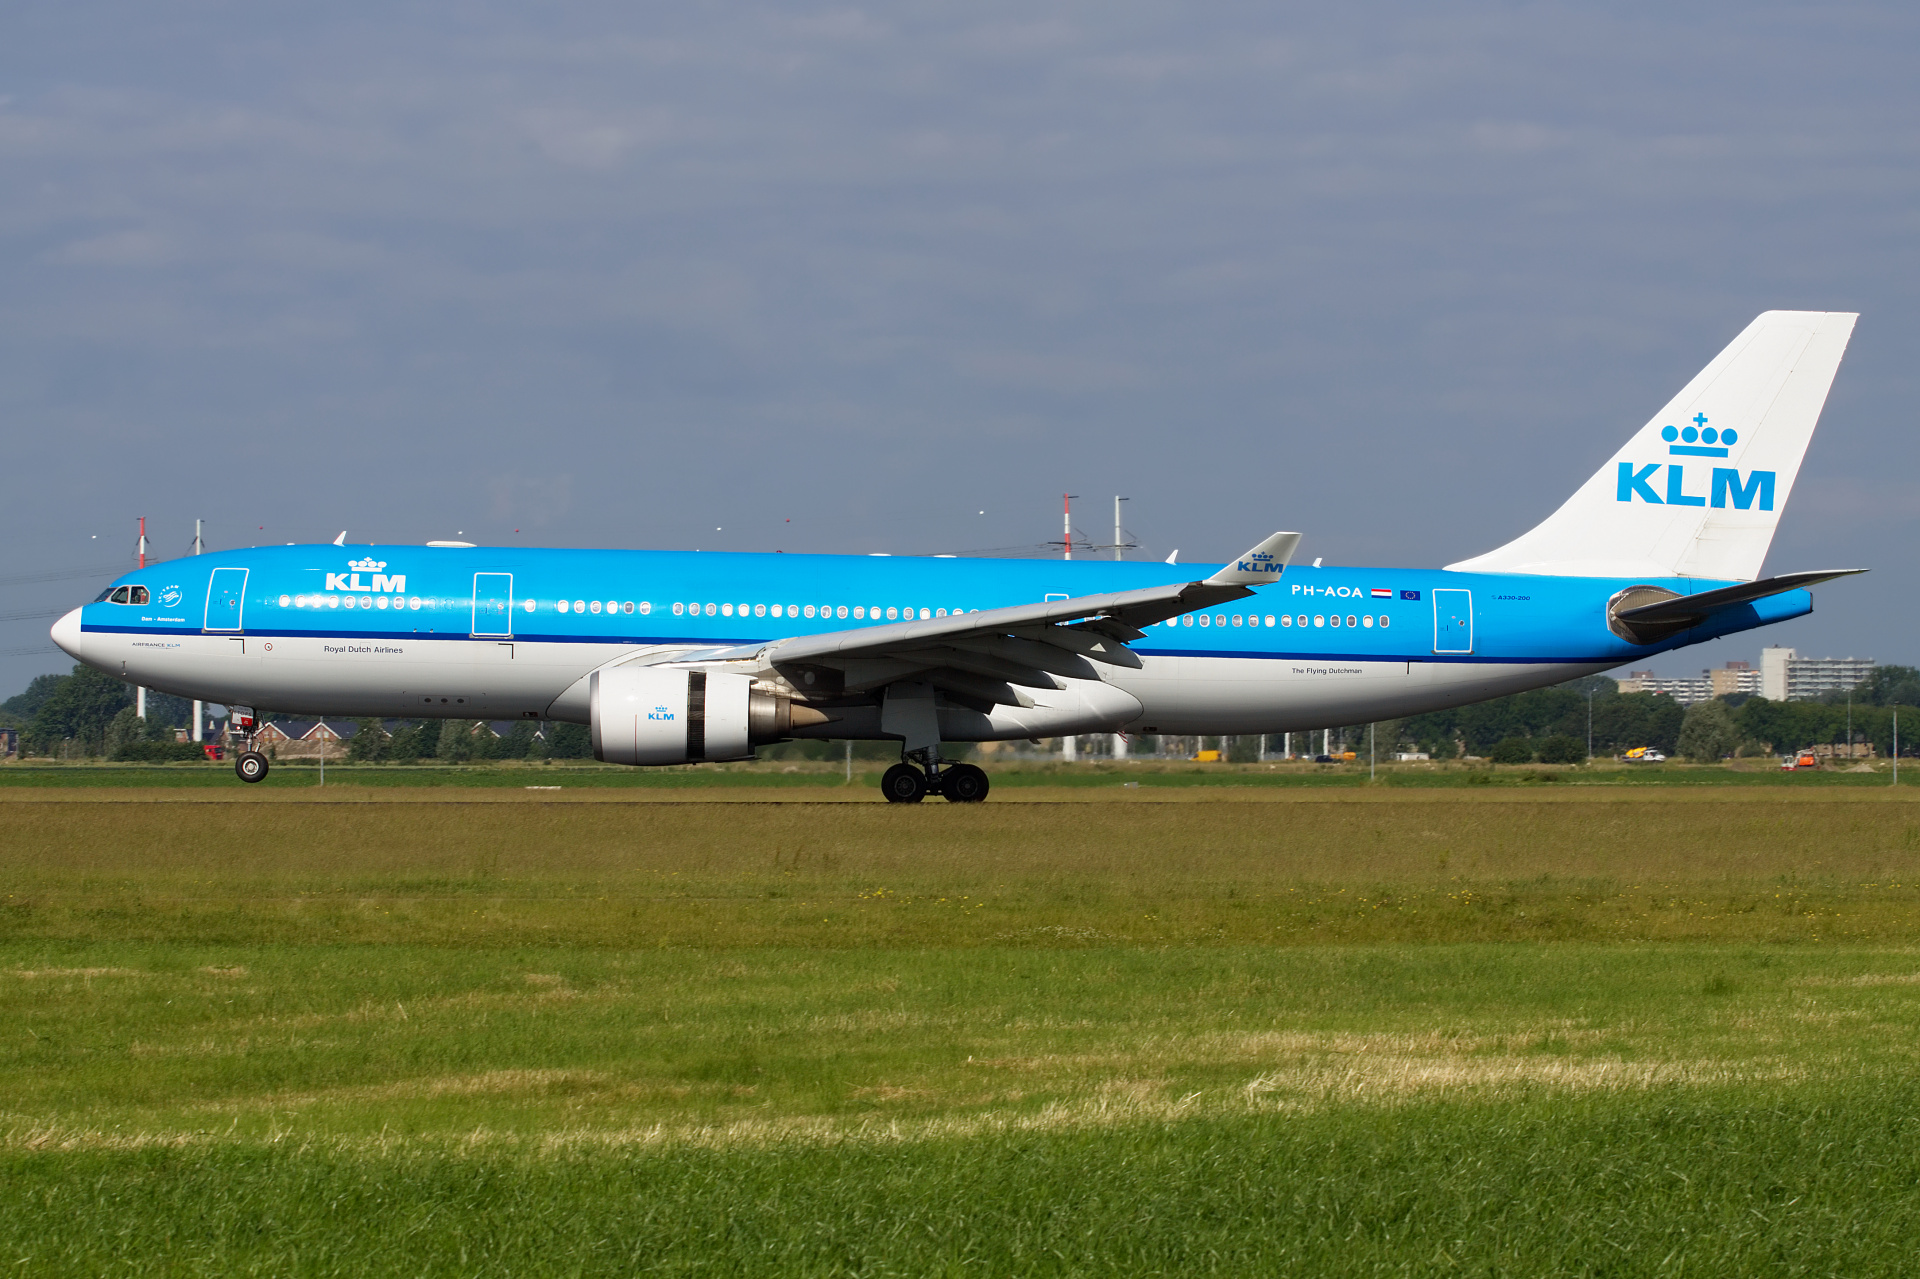 PH-AOA (Samoloty » Spotting na Schiphol » Airbus A330-200 » KLM Royal Dutch Airlines)